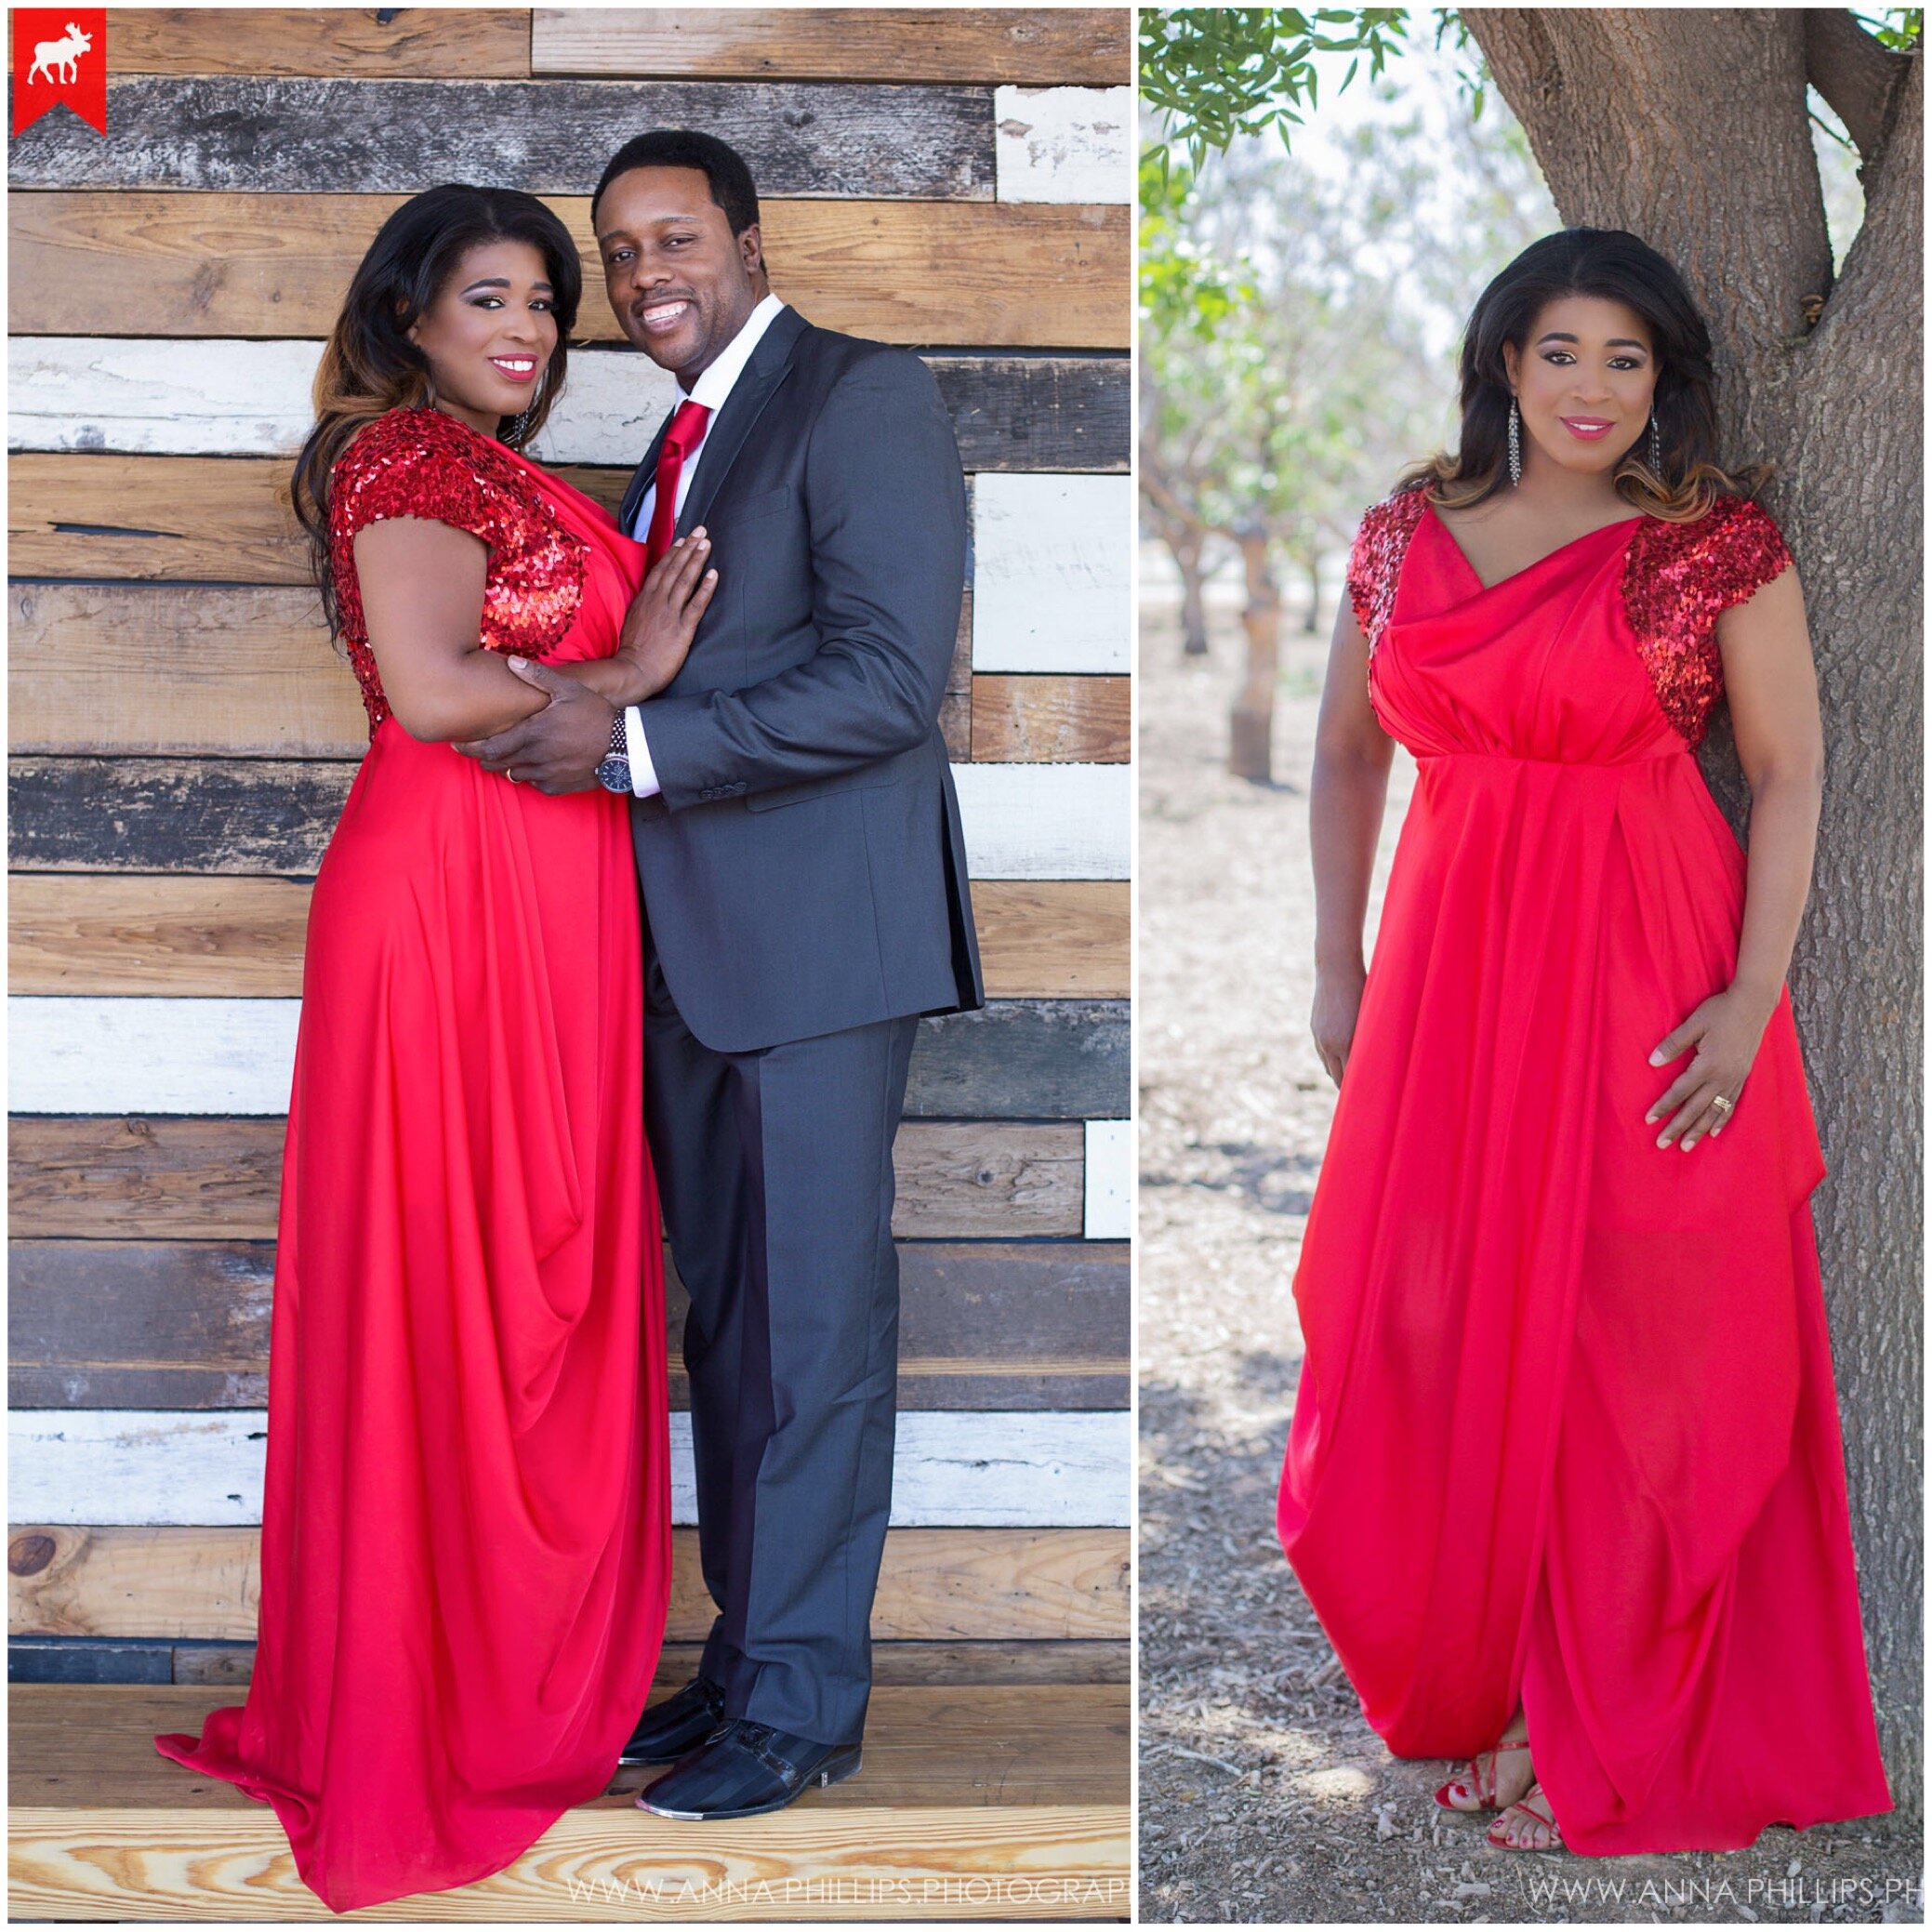 Red satin maxi front draped evening dress with red sequin cap sleeves for Valentines Day husband and wife photo shoot.JPG